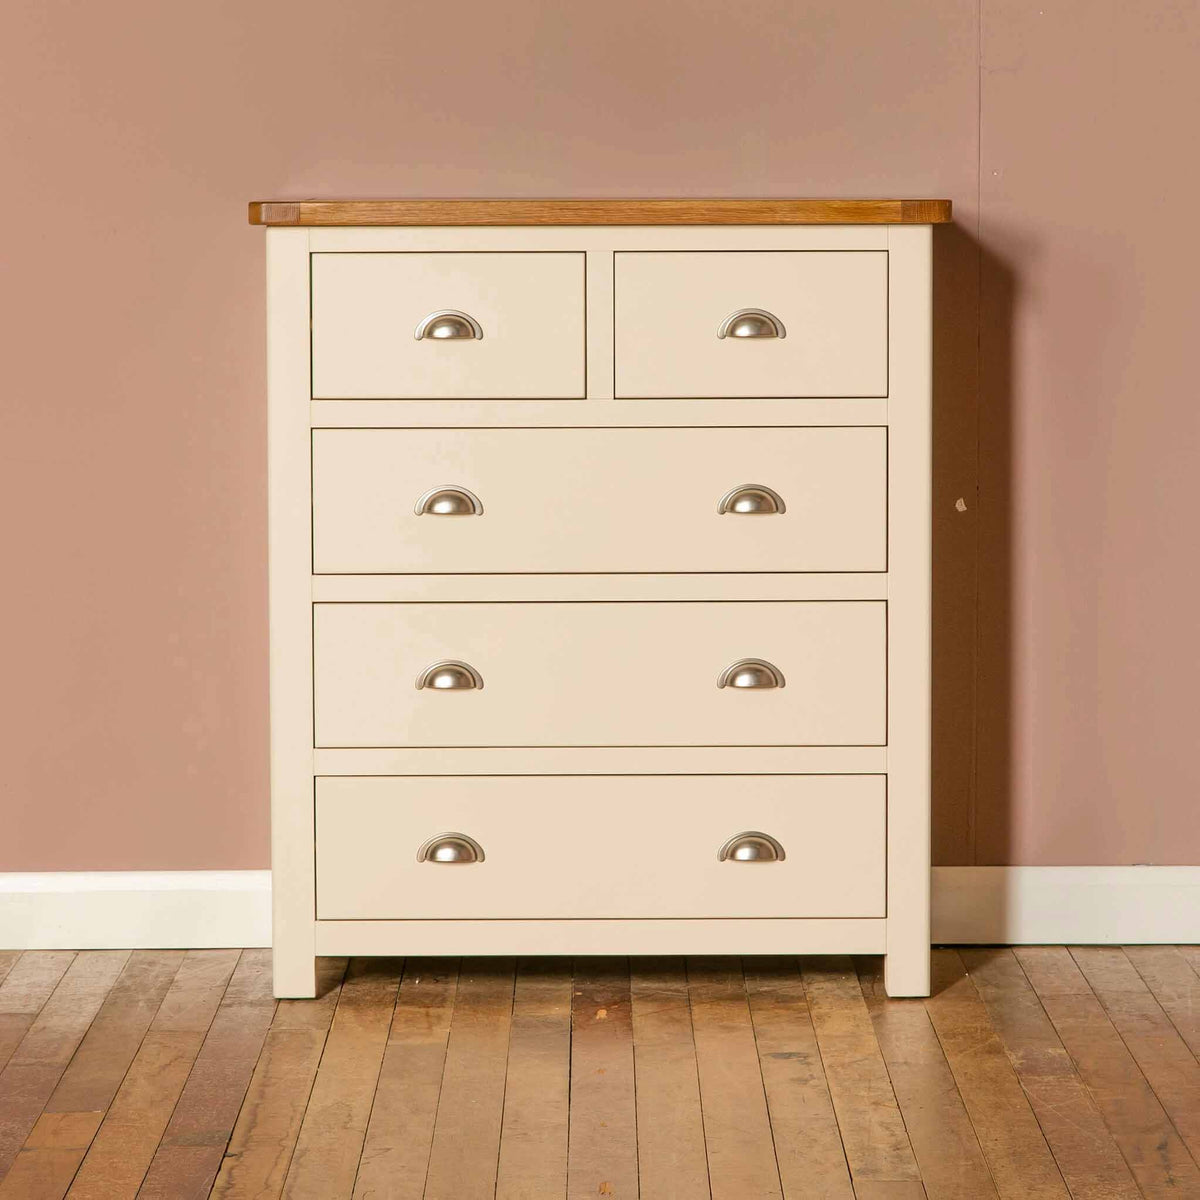 The Padstow Cream Wooden Bedroom Chest of Drawers with Oak Top from Roseland Furniture